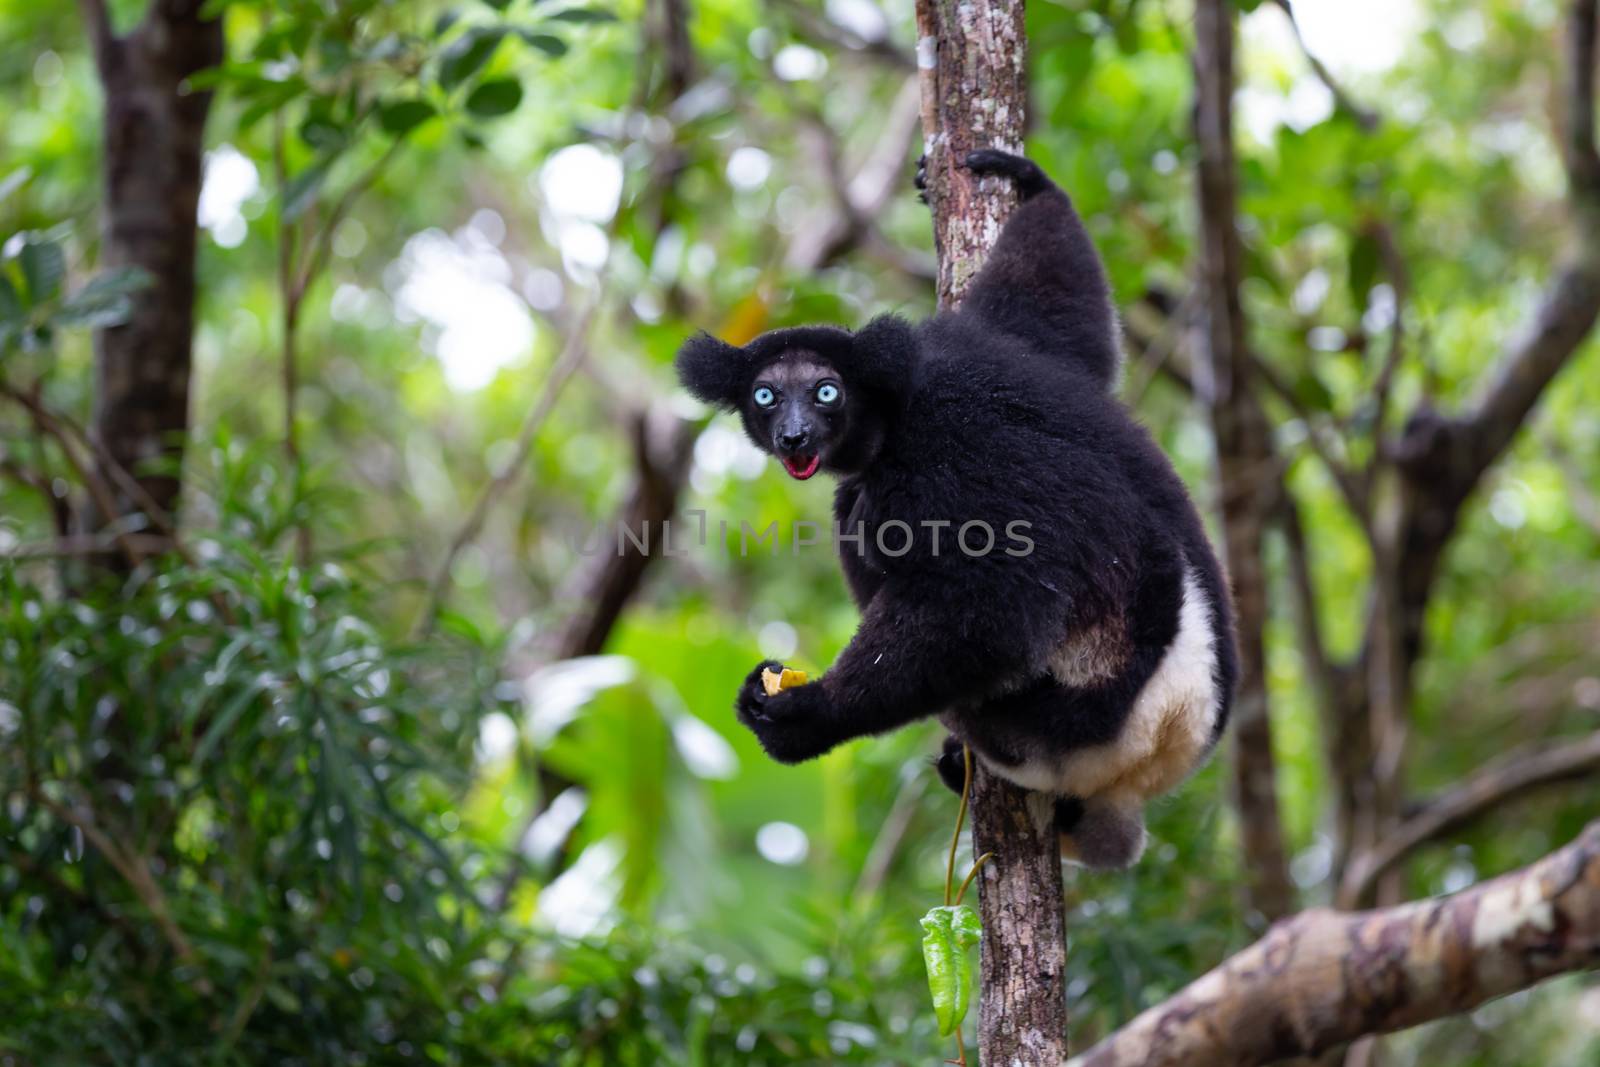 An Indri lemur on the tree watches the visitors to the park by 25ehaag6